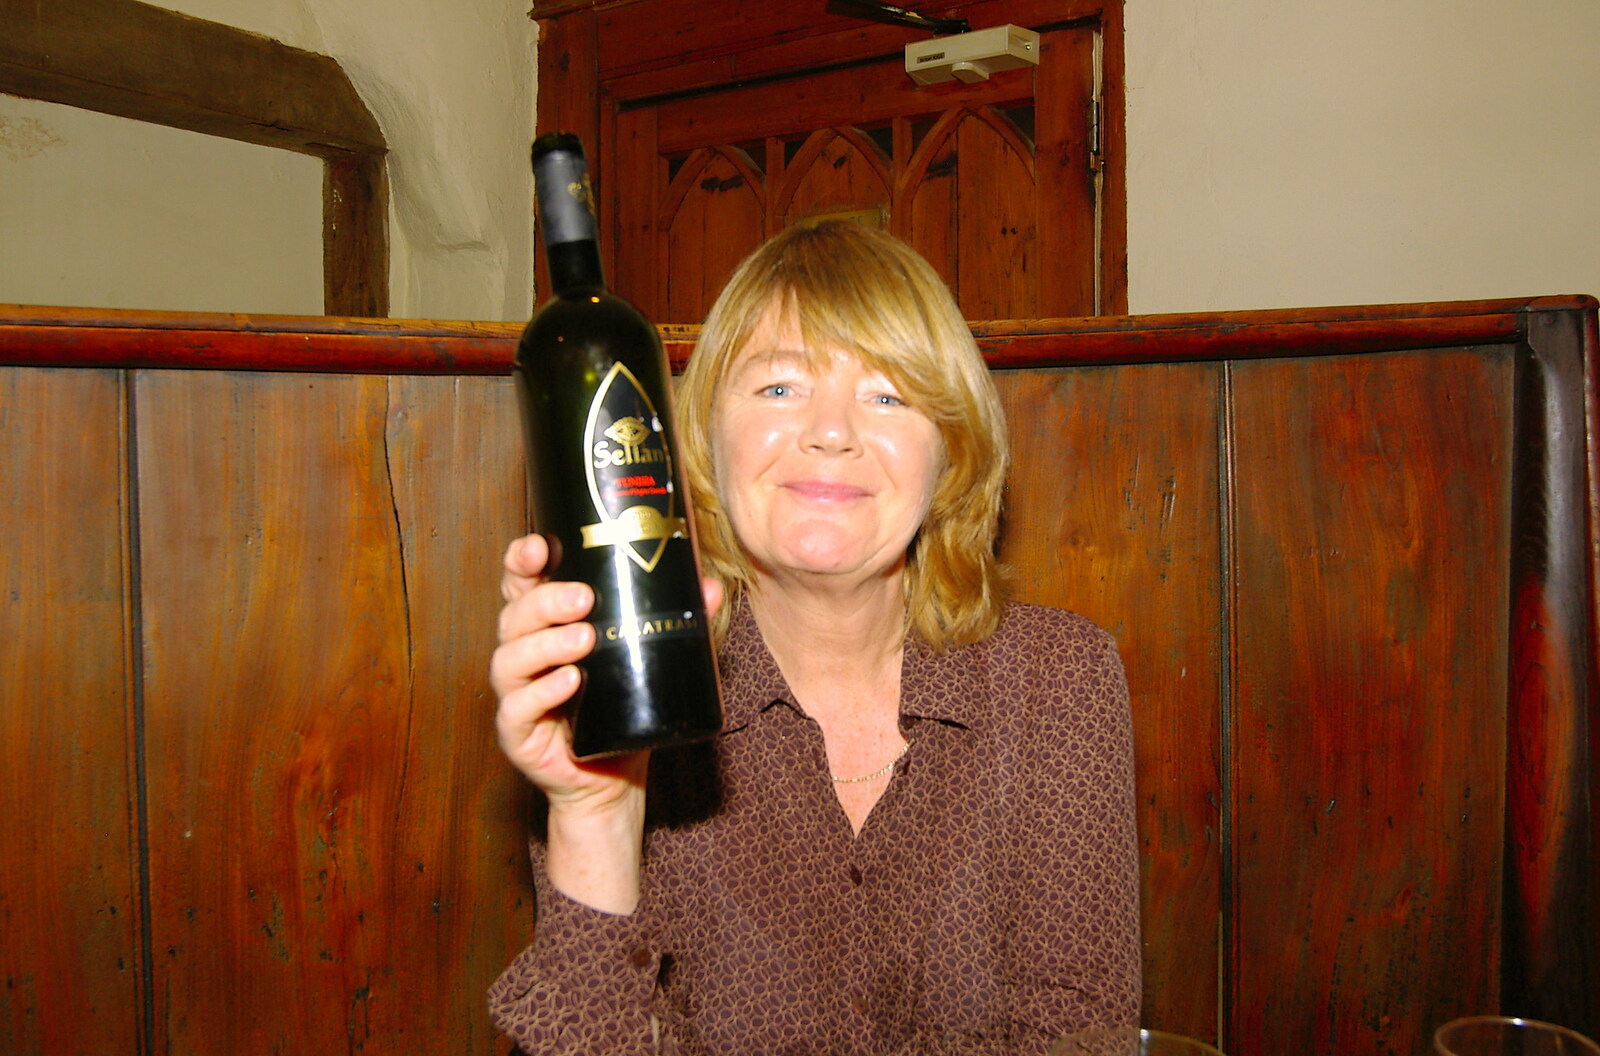 Mother holds up a bottle of Lebanese wine from Mother, Mike and the Stiffkey Light Shop, Cley and Holkham - 6th November 2005